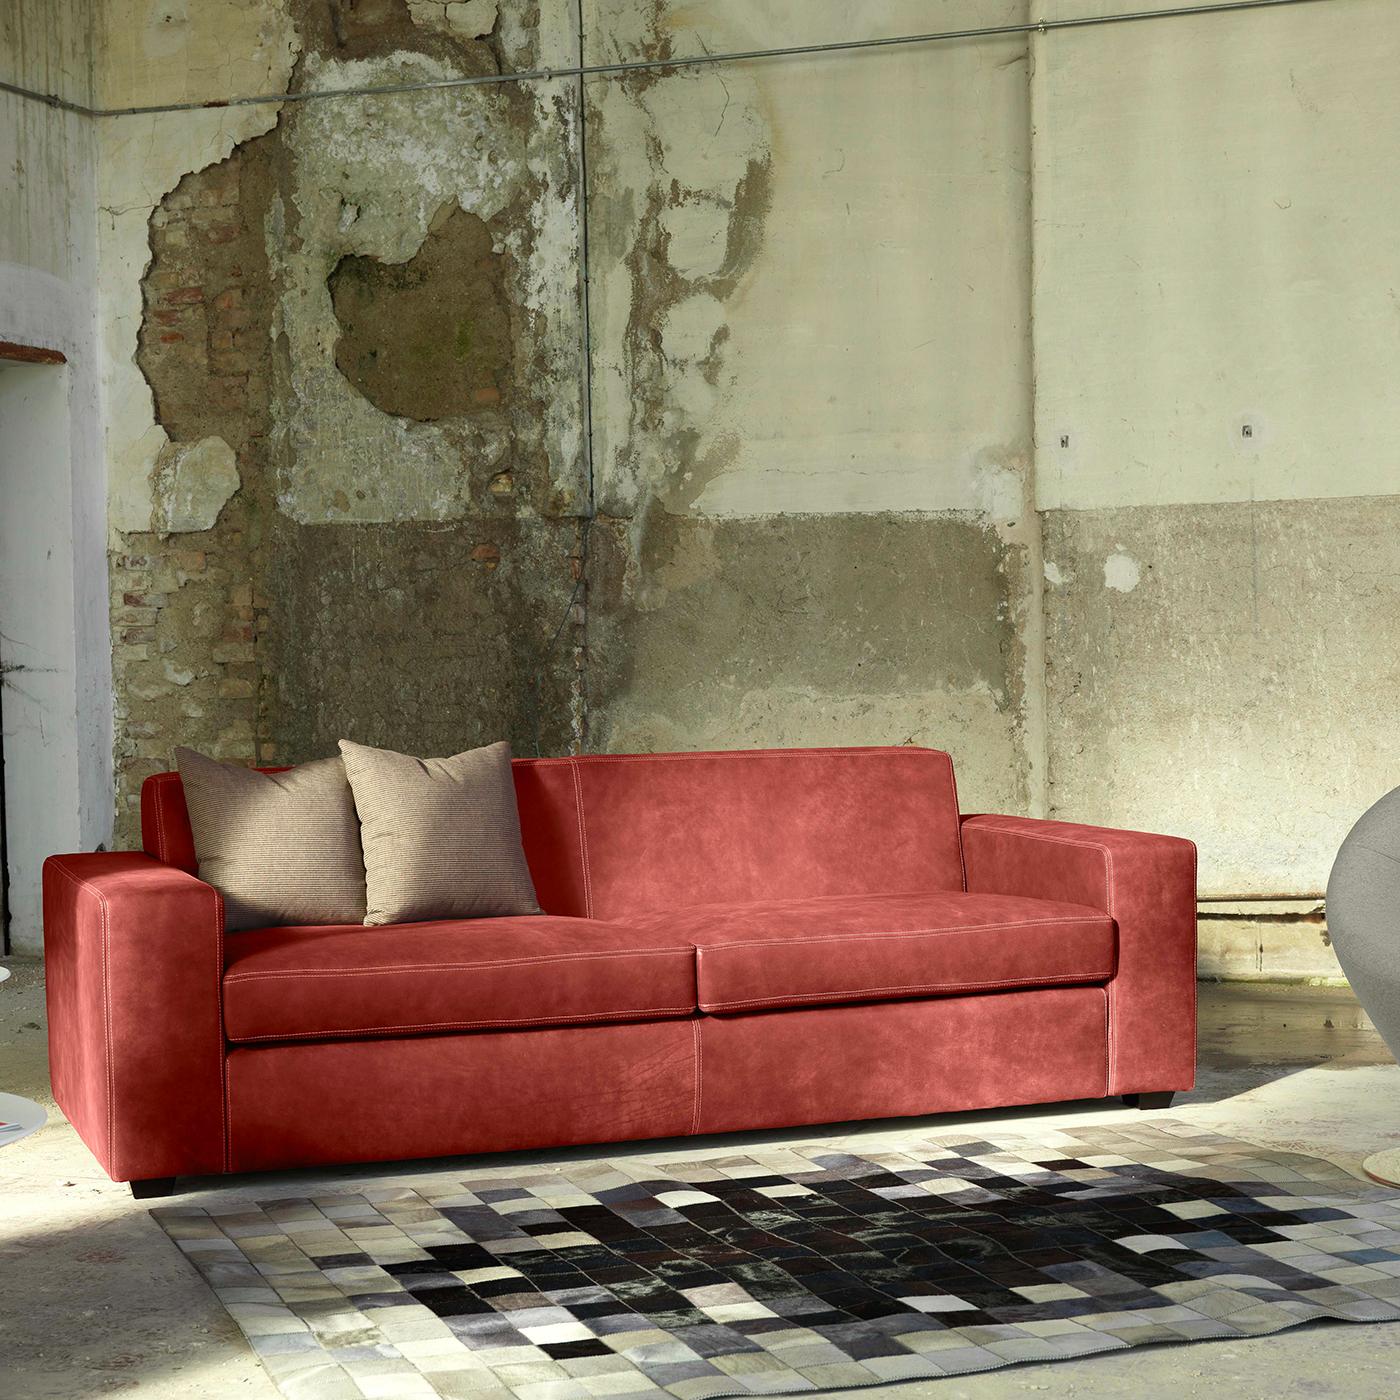 The perfect mix of pleasing aesthetics and comfort, this refined sofa flaunts a Classic Silhouette upholstered in brick red Dacron fabric with tone-on-tone stitching. Adding comfort to the wide seat, back, and generous track armrests, the